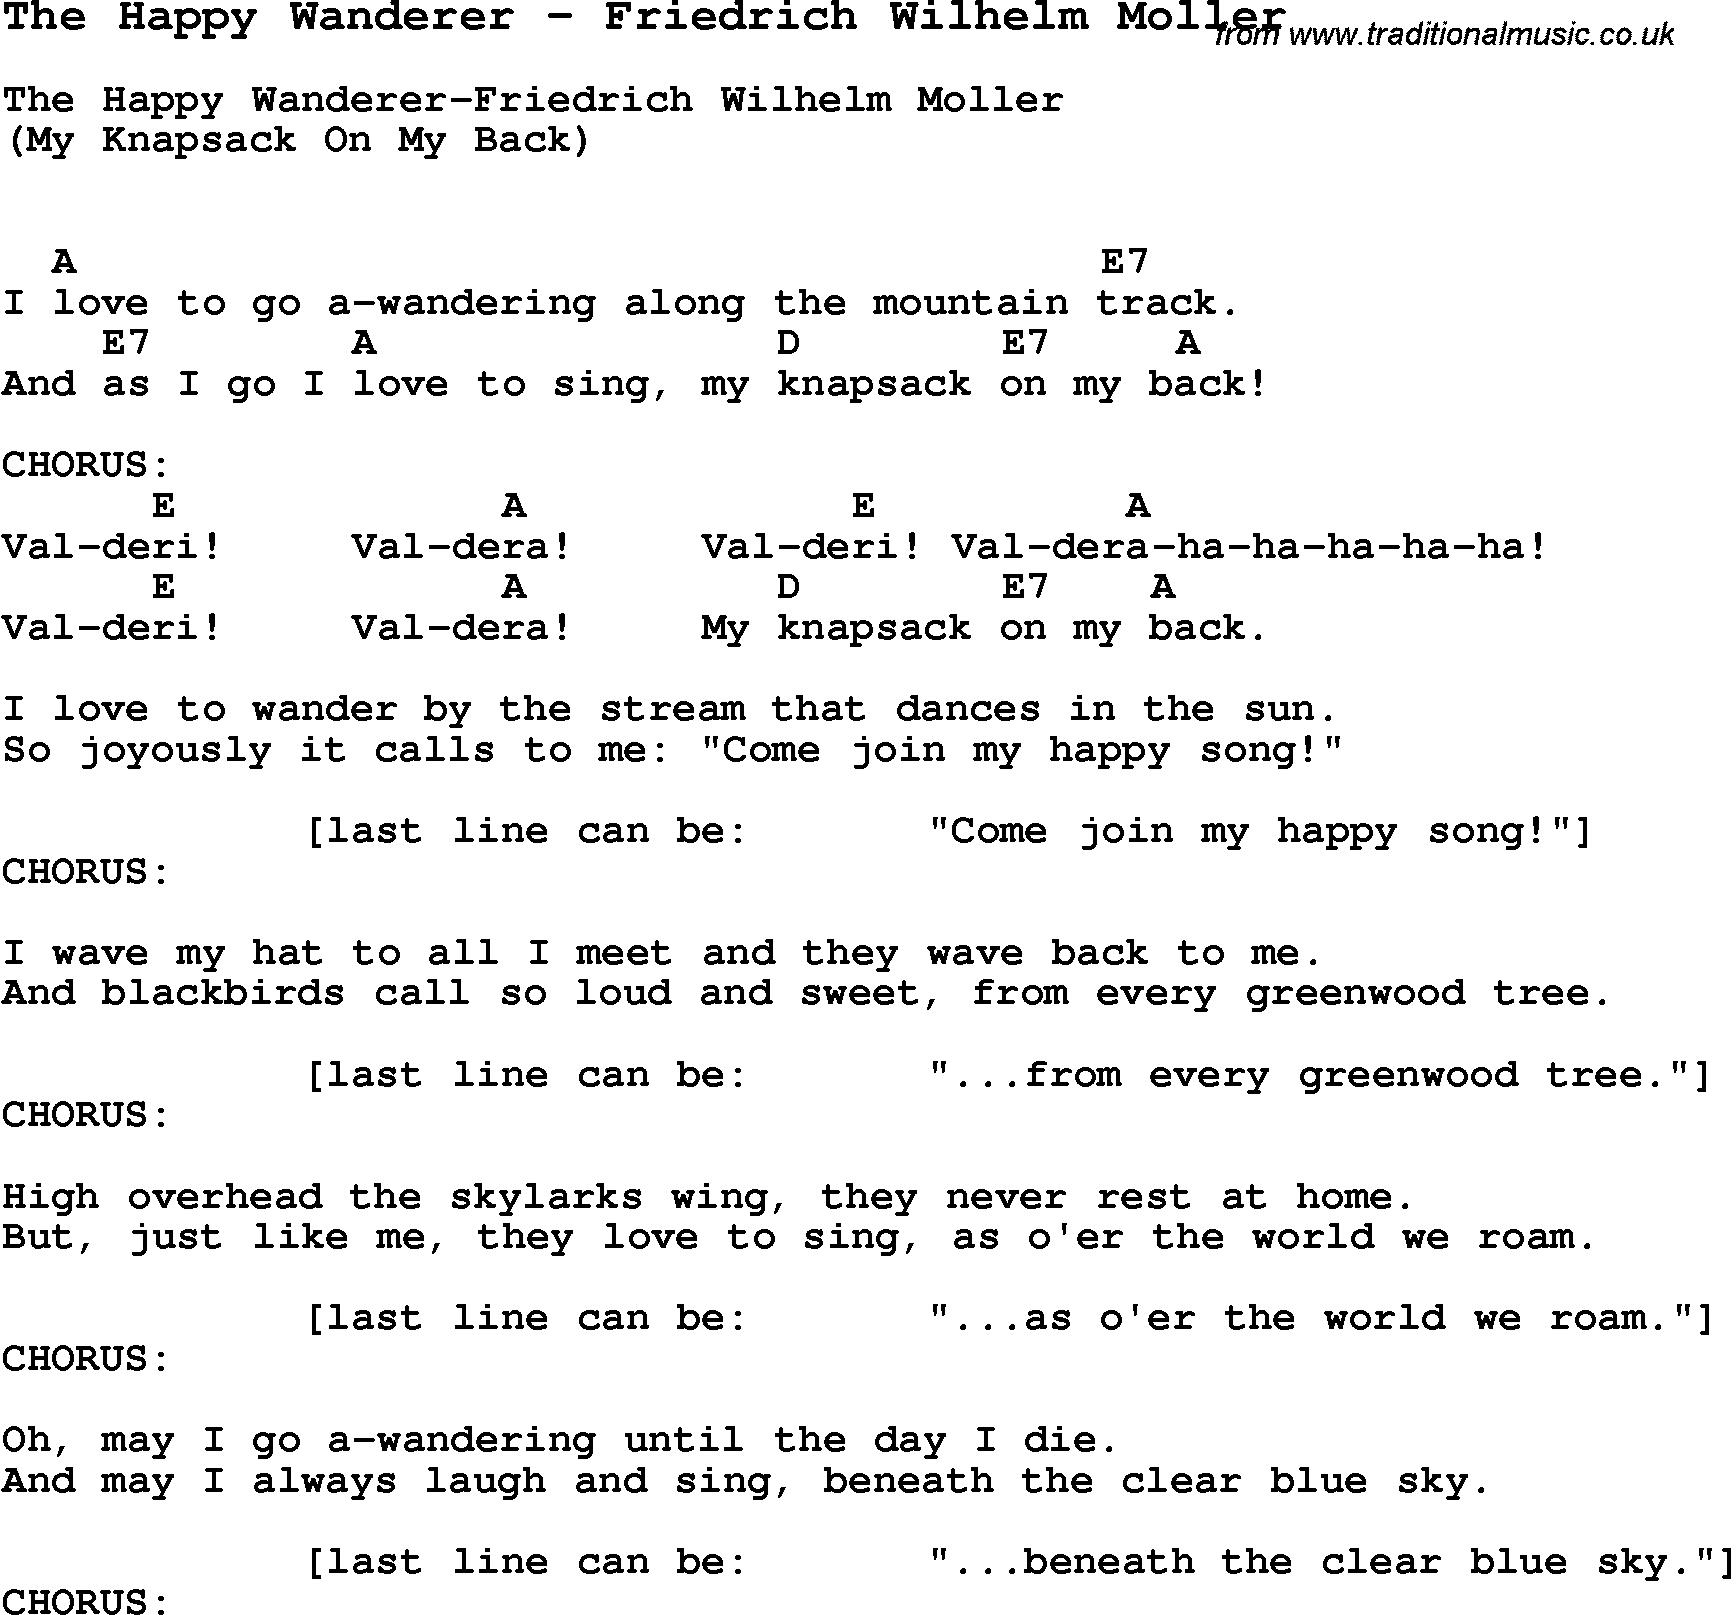 Song The Happy Wanderer by Friedrich Wilhelm Moller, with lyrics for vocal performance and accompaniment chords for Ukulele, Guitar Banjo etc.